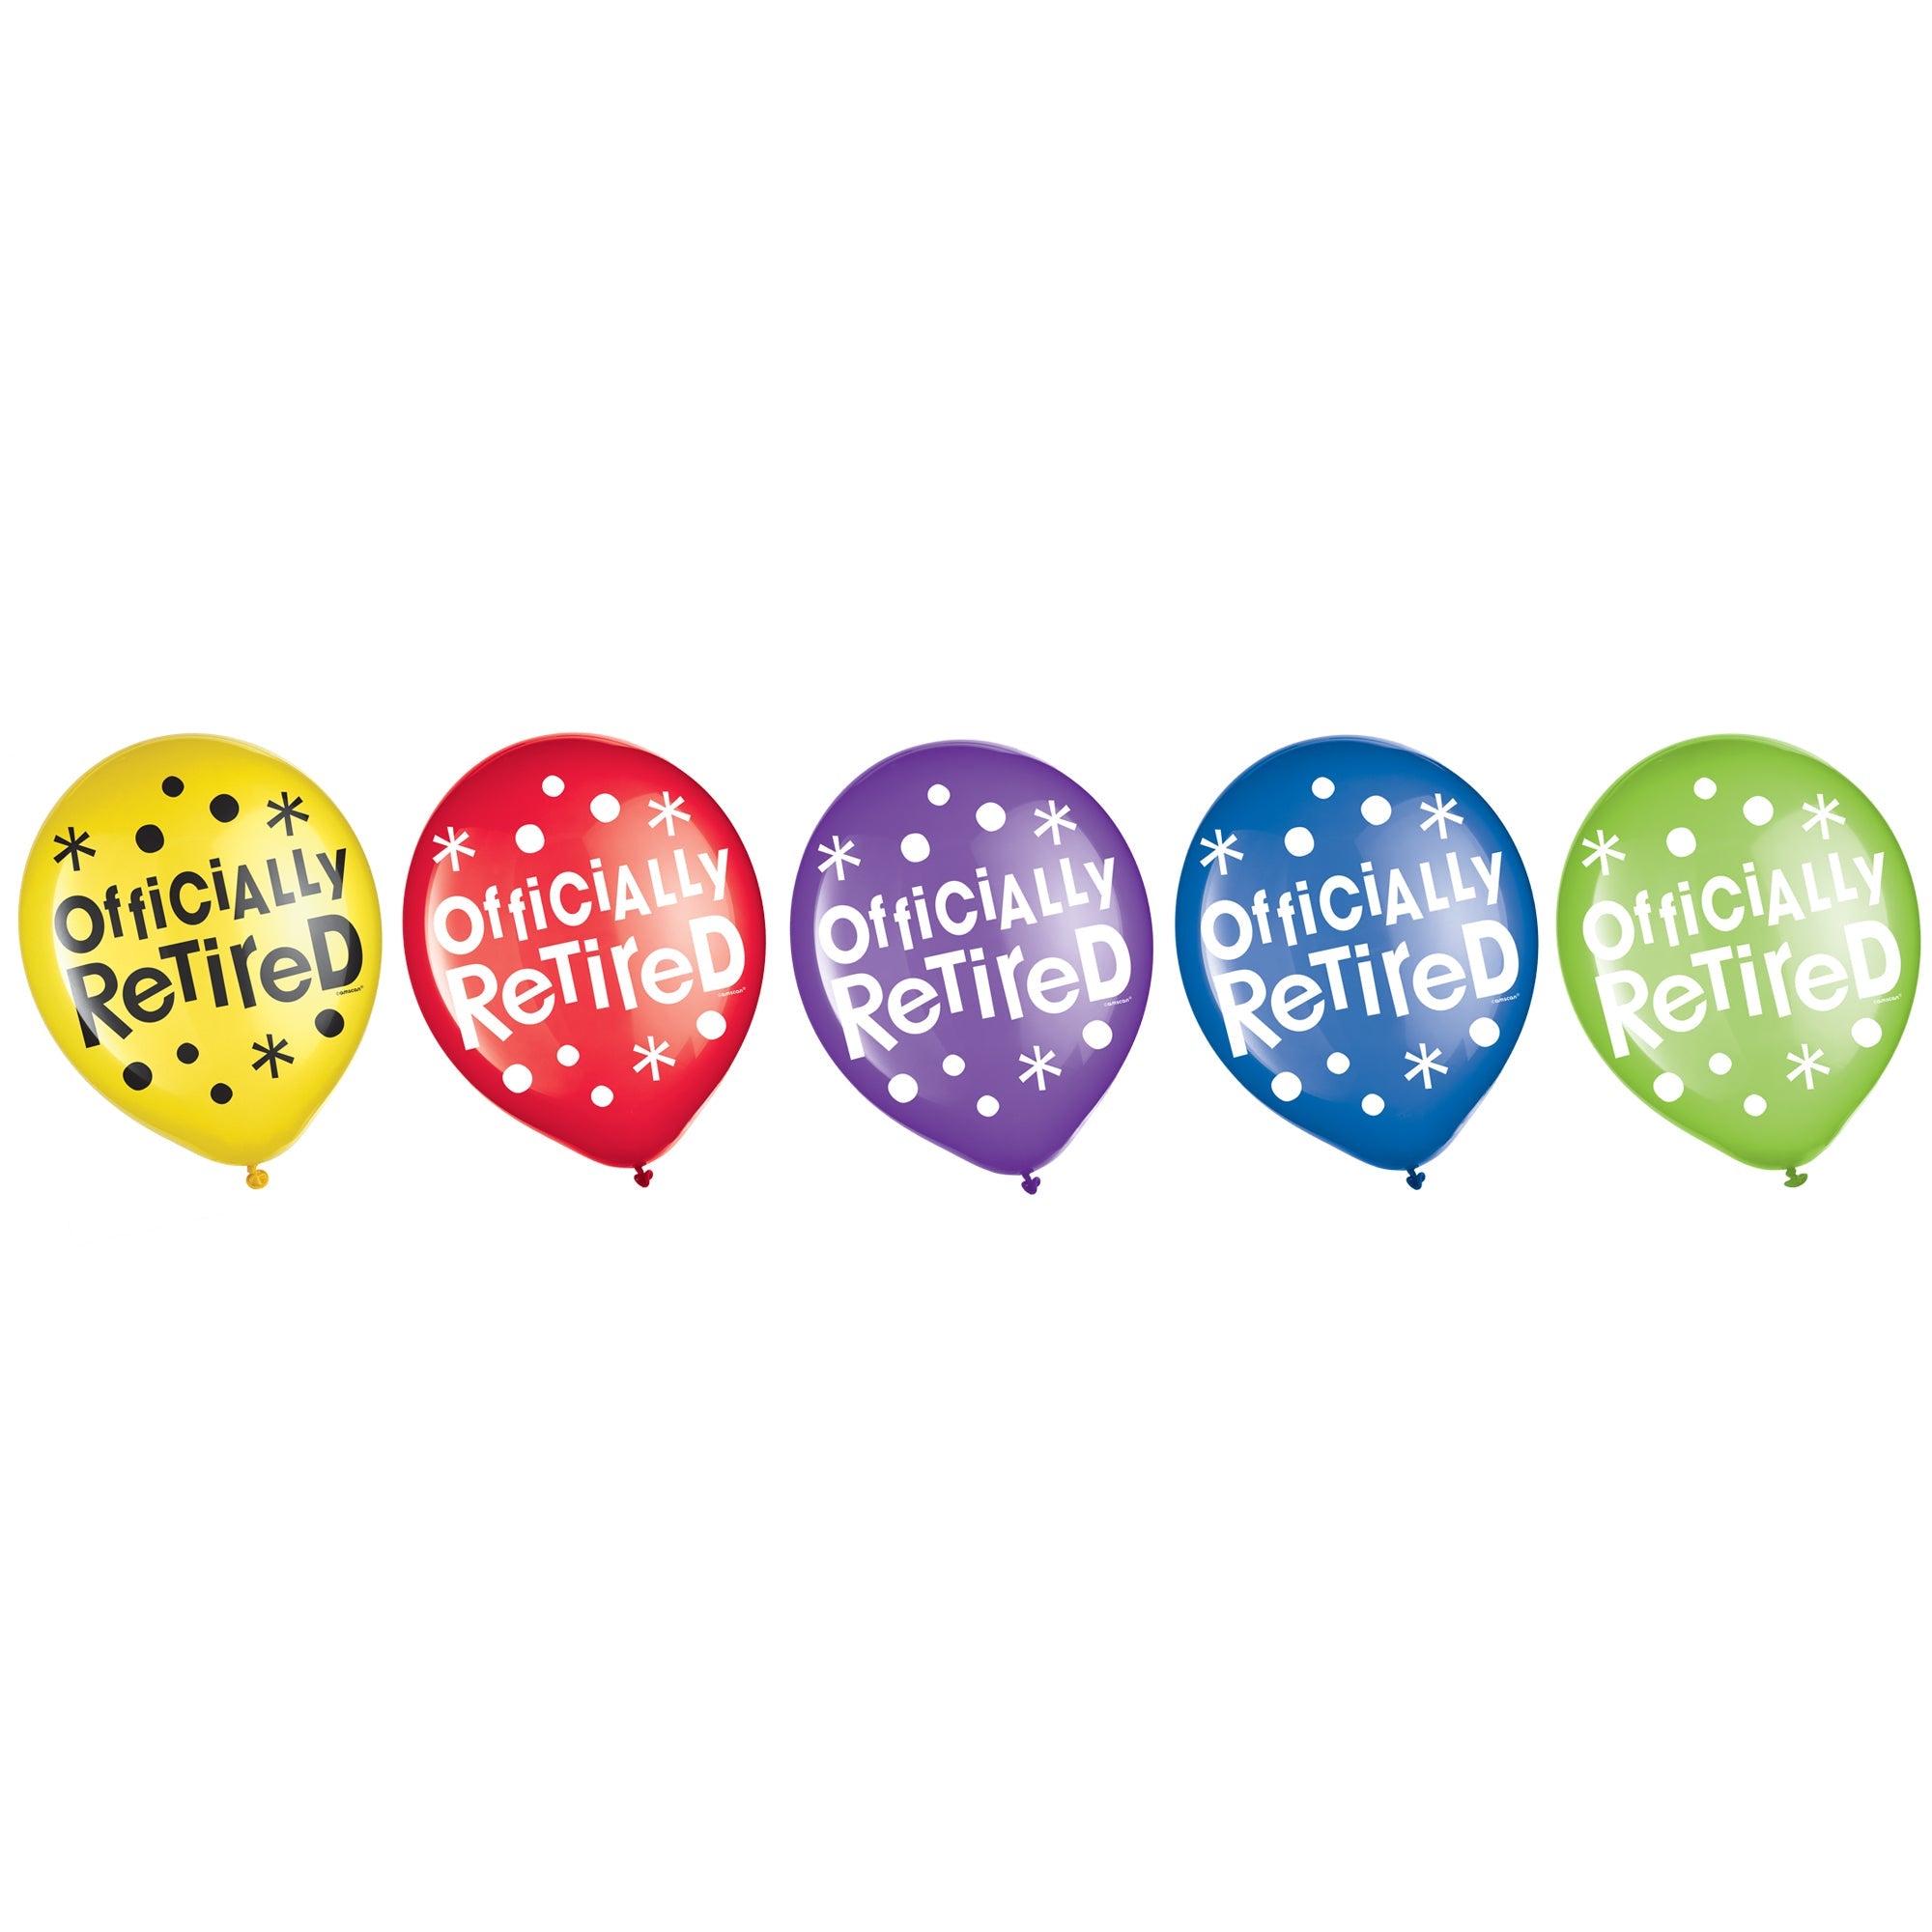 Officially Retired 15 Printed Latex Balloons  Asst. Colors  12in